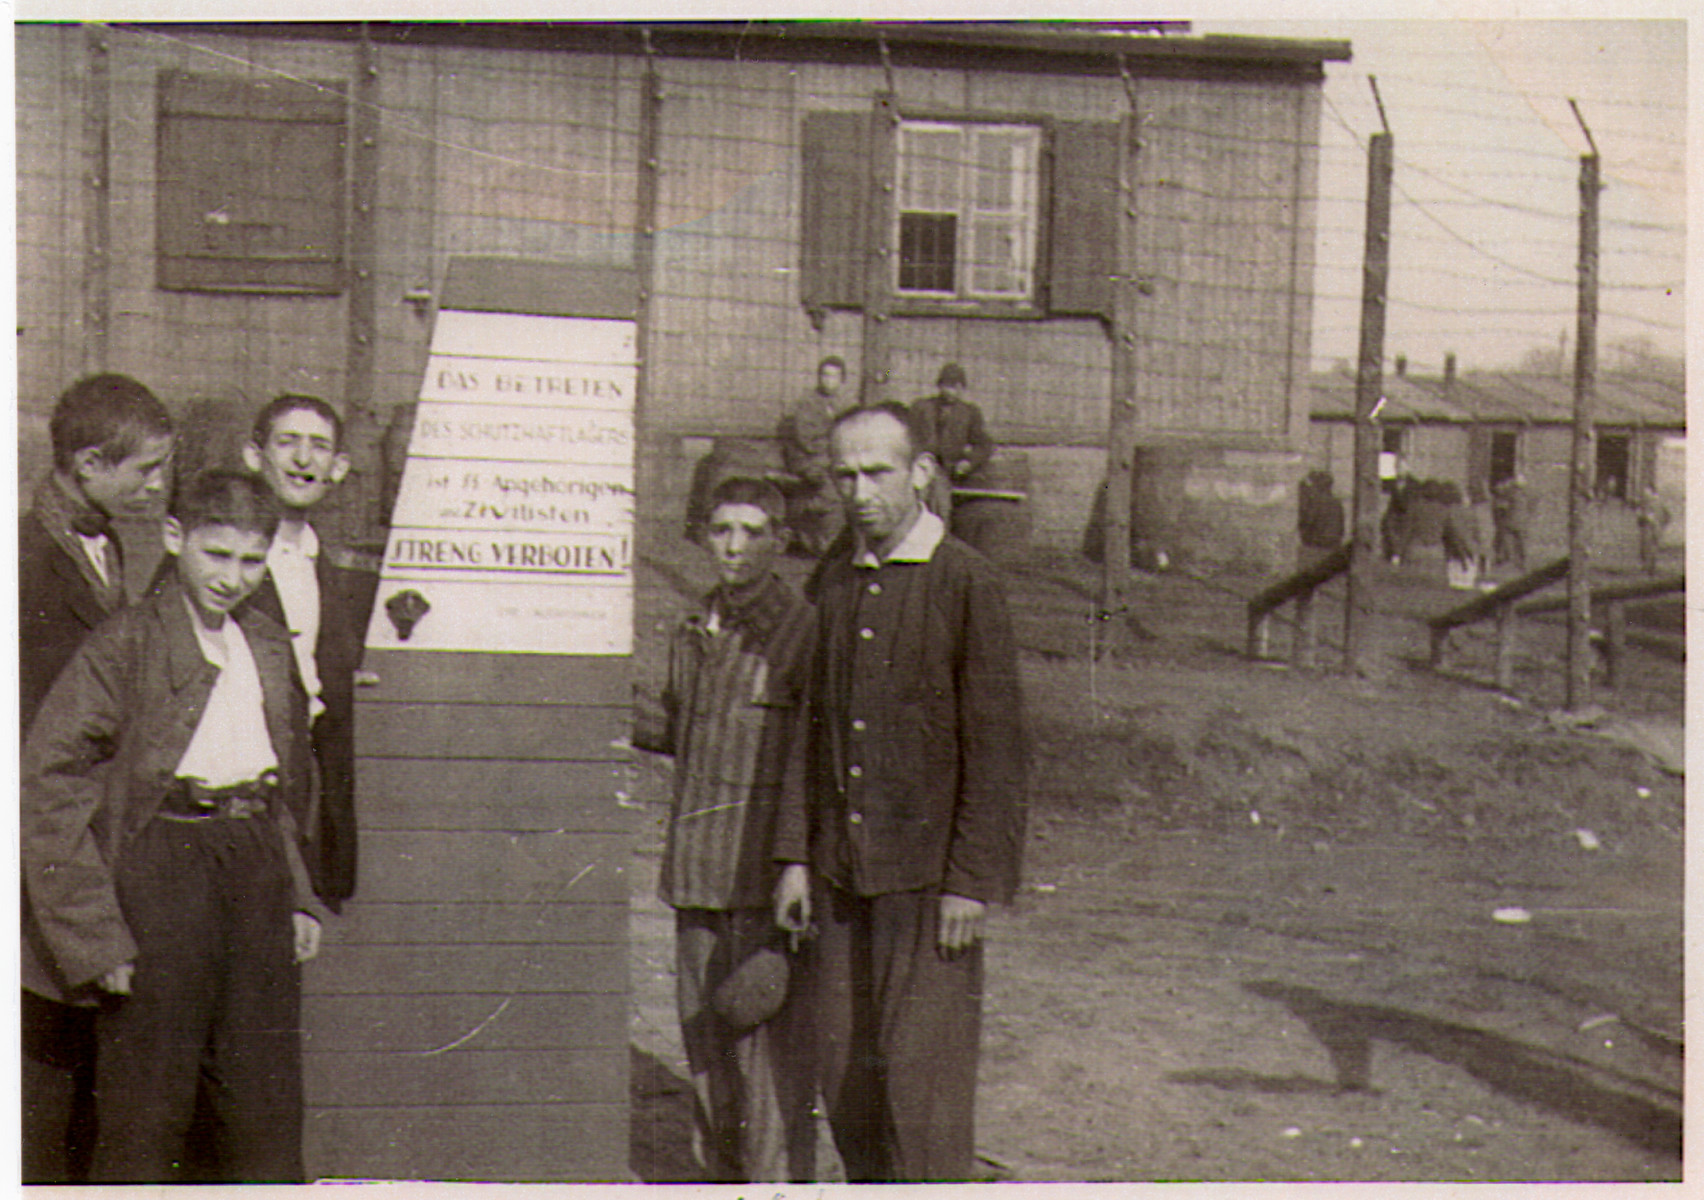 A group of survivors, including many children, stand in front of the barbed wire fence at the entrance to the Hanover-Ahlem concentration camp.

The German sign posted in front of the fence reads "The entrance to the prison camp by relatives of the SS and civilians is strictly forbidden."